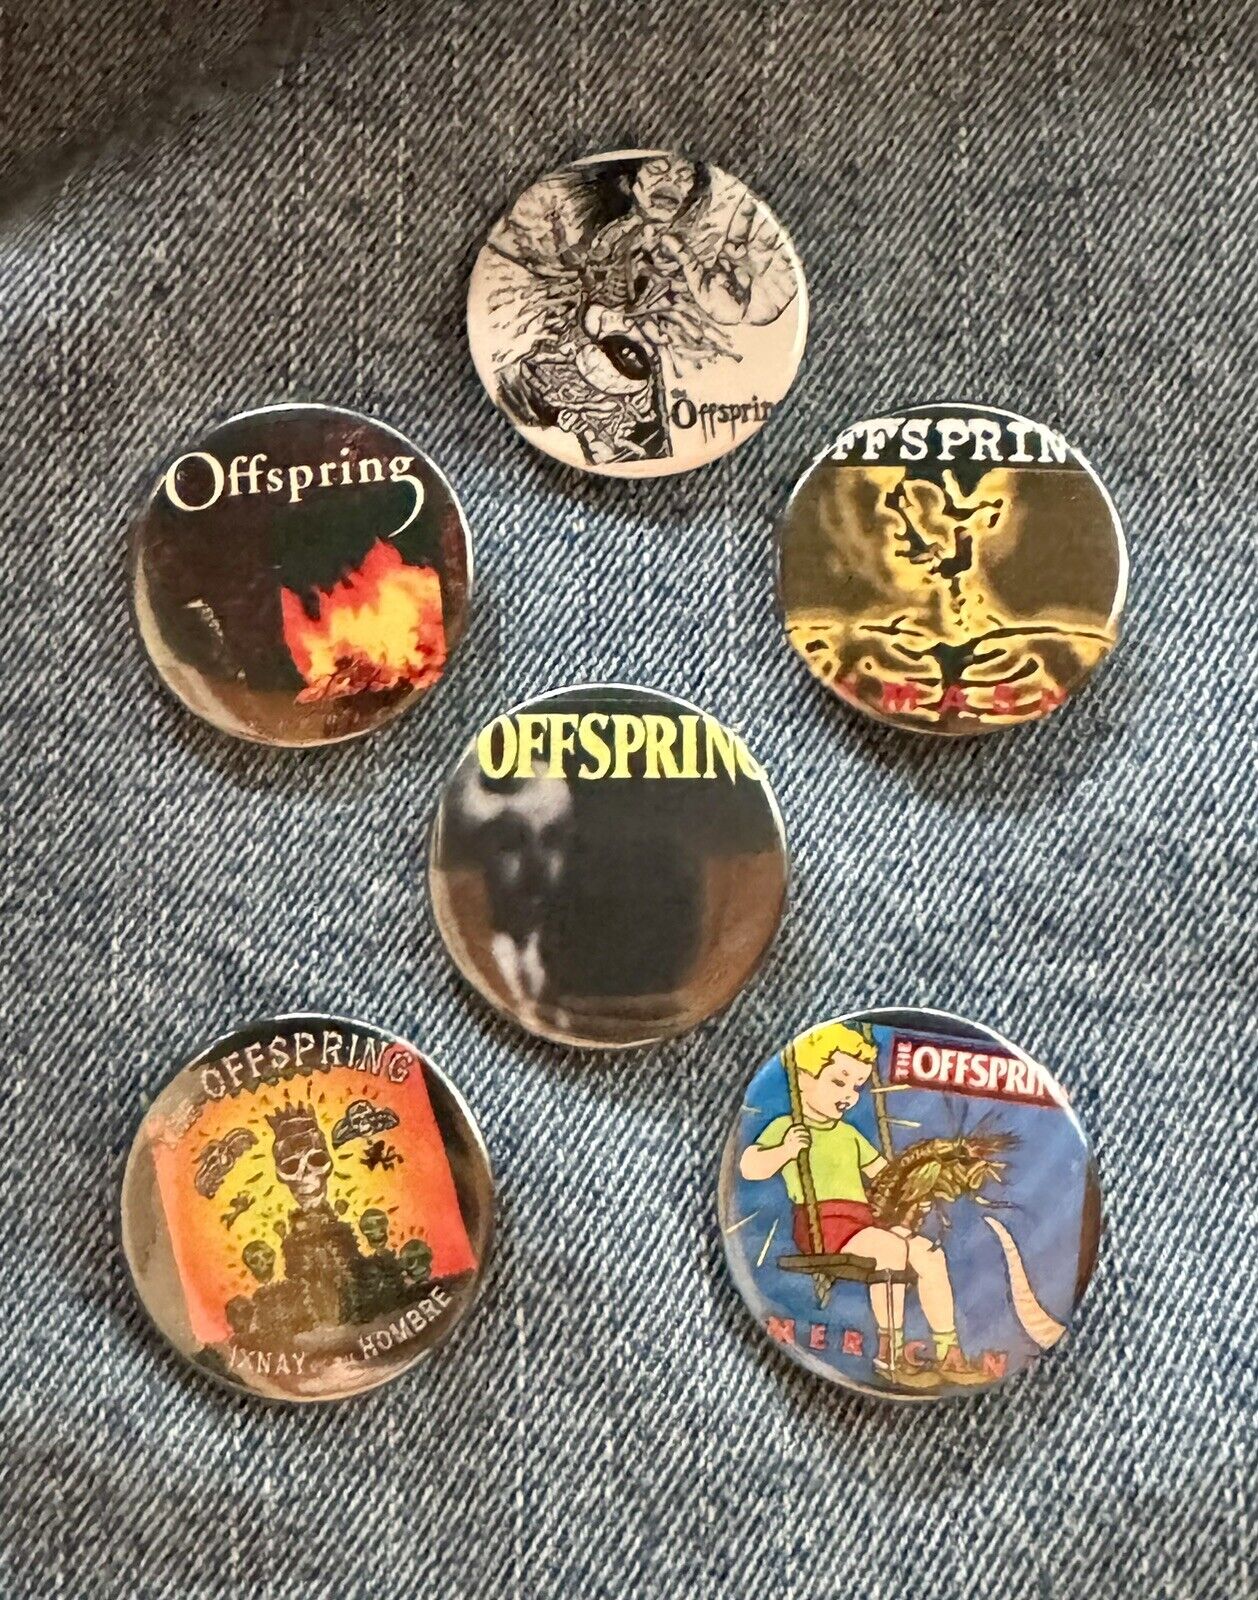 The Offspring  “The First 5” Album Covers 1.5” Pin Back Buttons W/ Chase